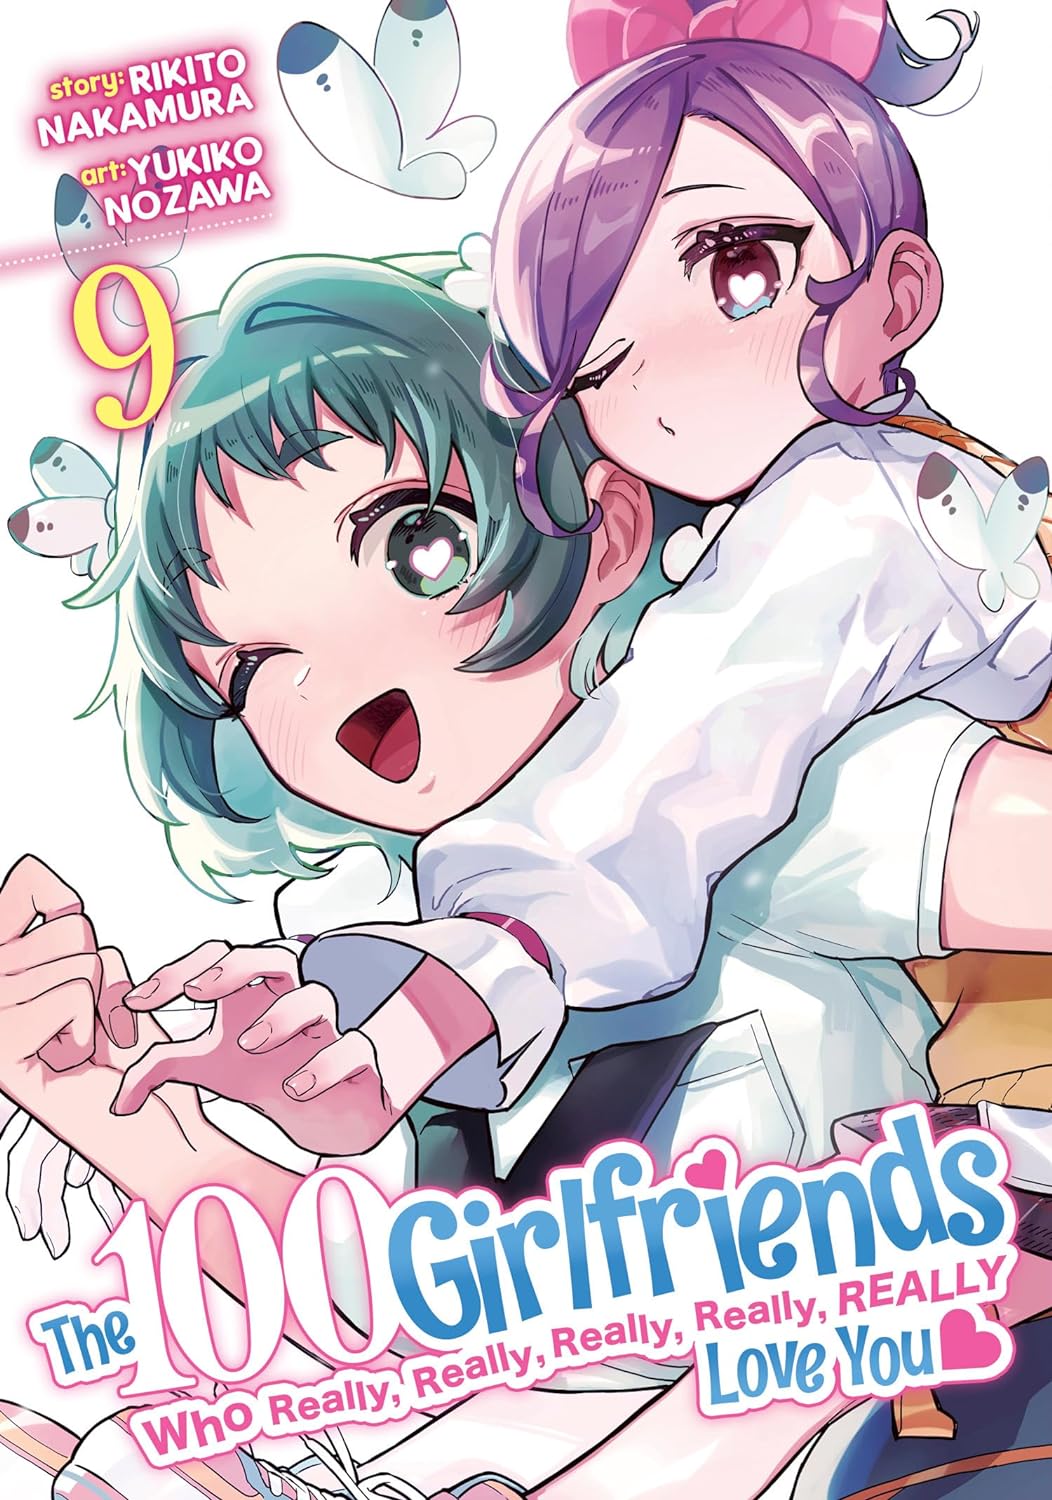 The 100 Girlfriends Who Really, Really, Really, Really, Really Love You Vol. 09